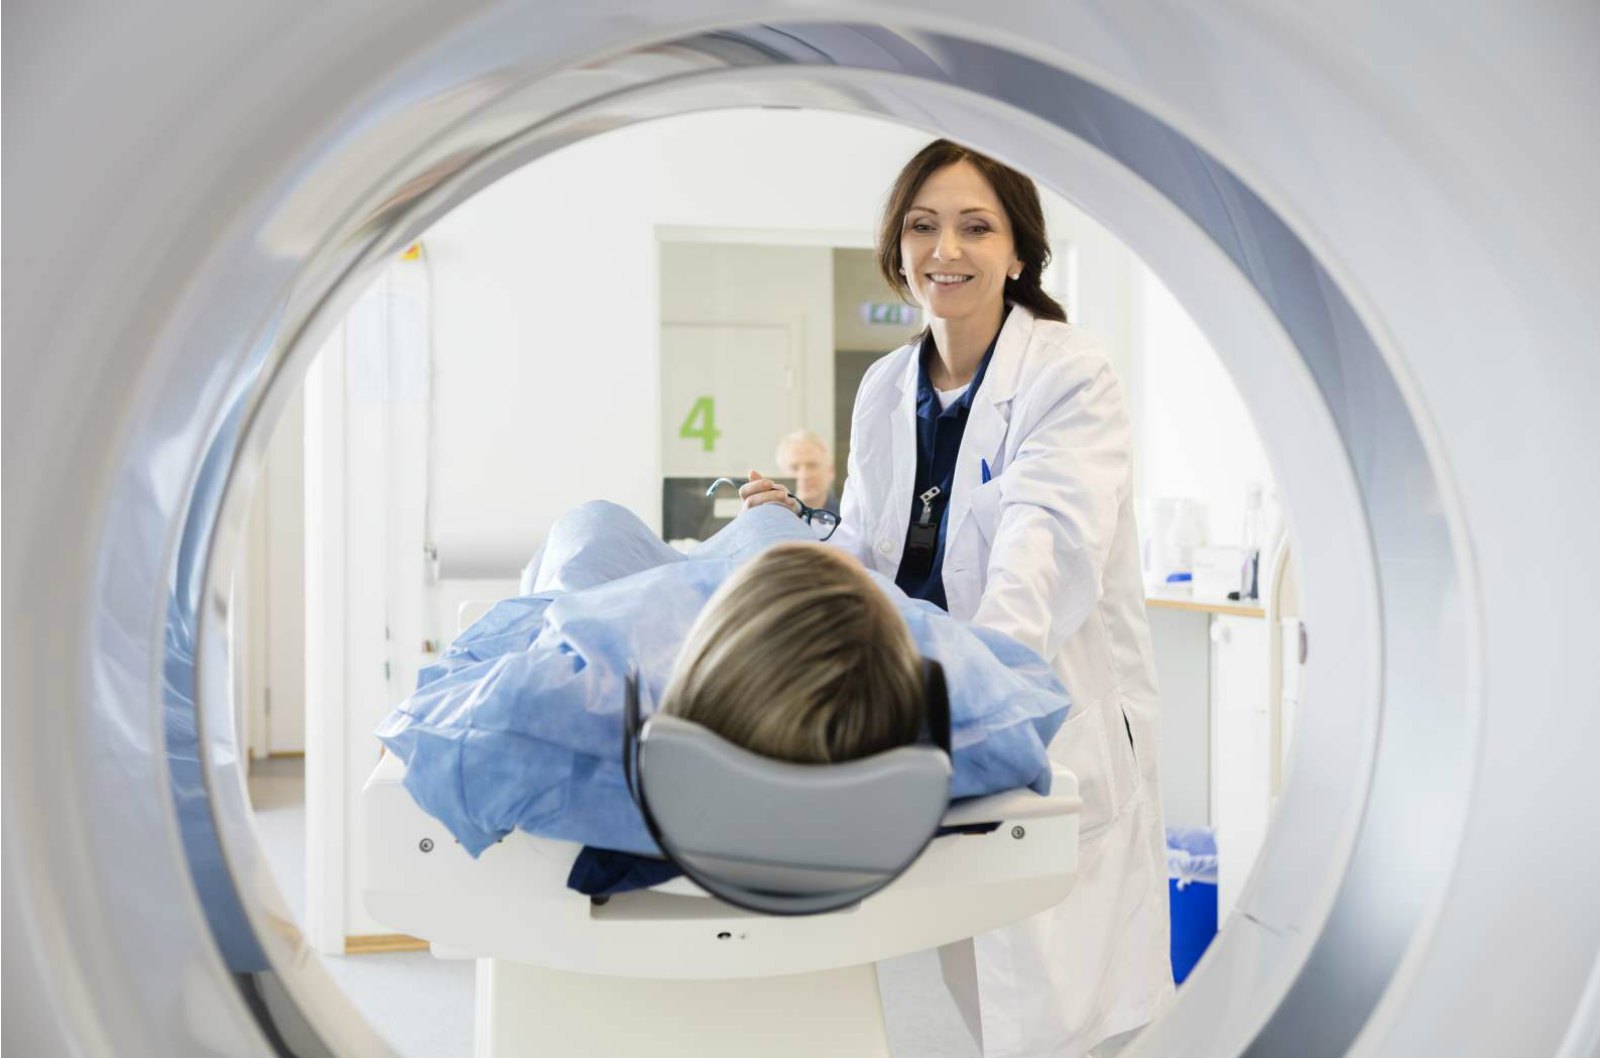 Super Vision: MRI Scanners Replace the Need for Riskier Surgical Procedures